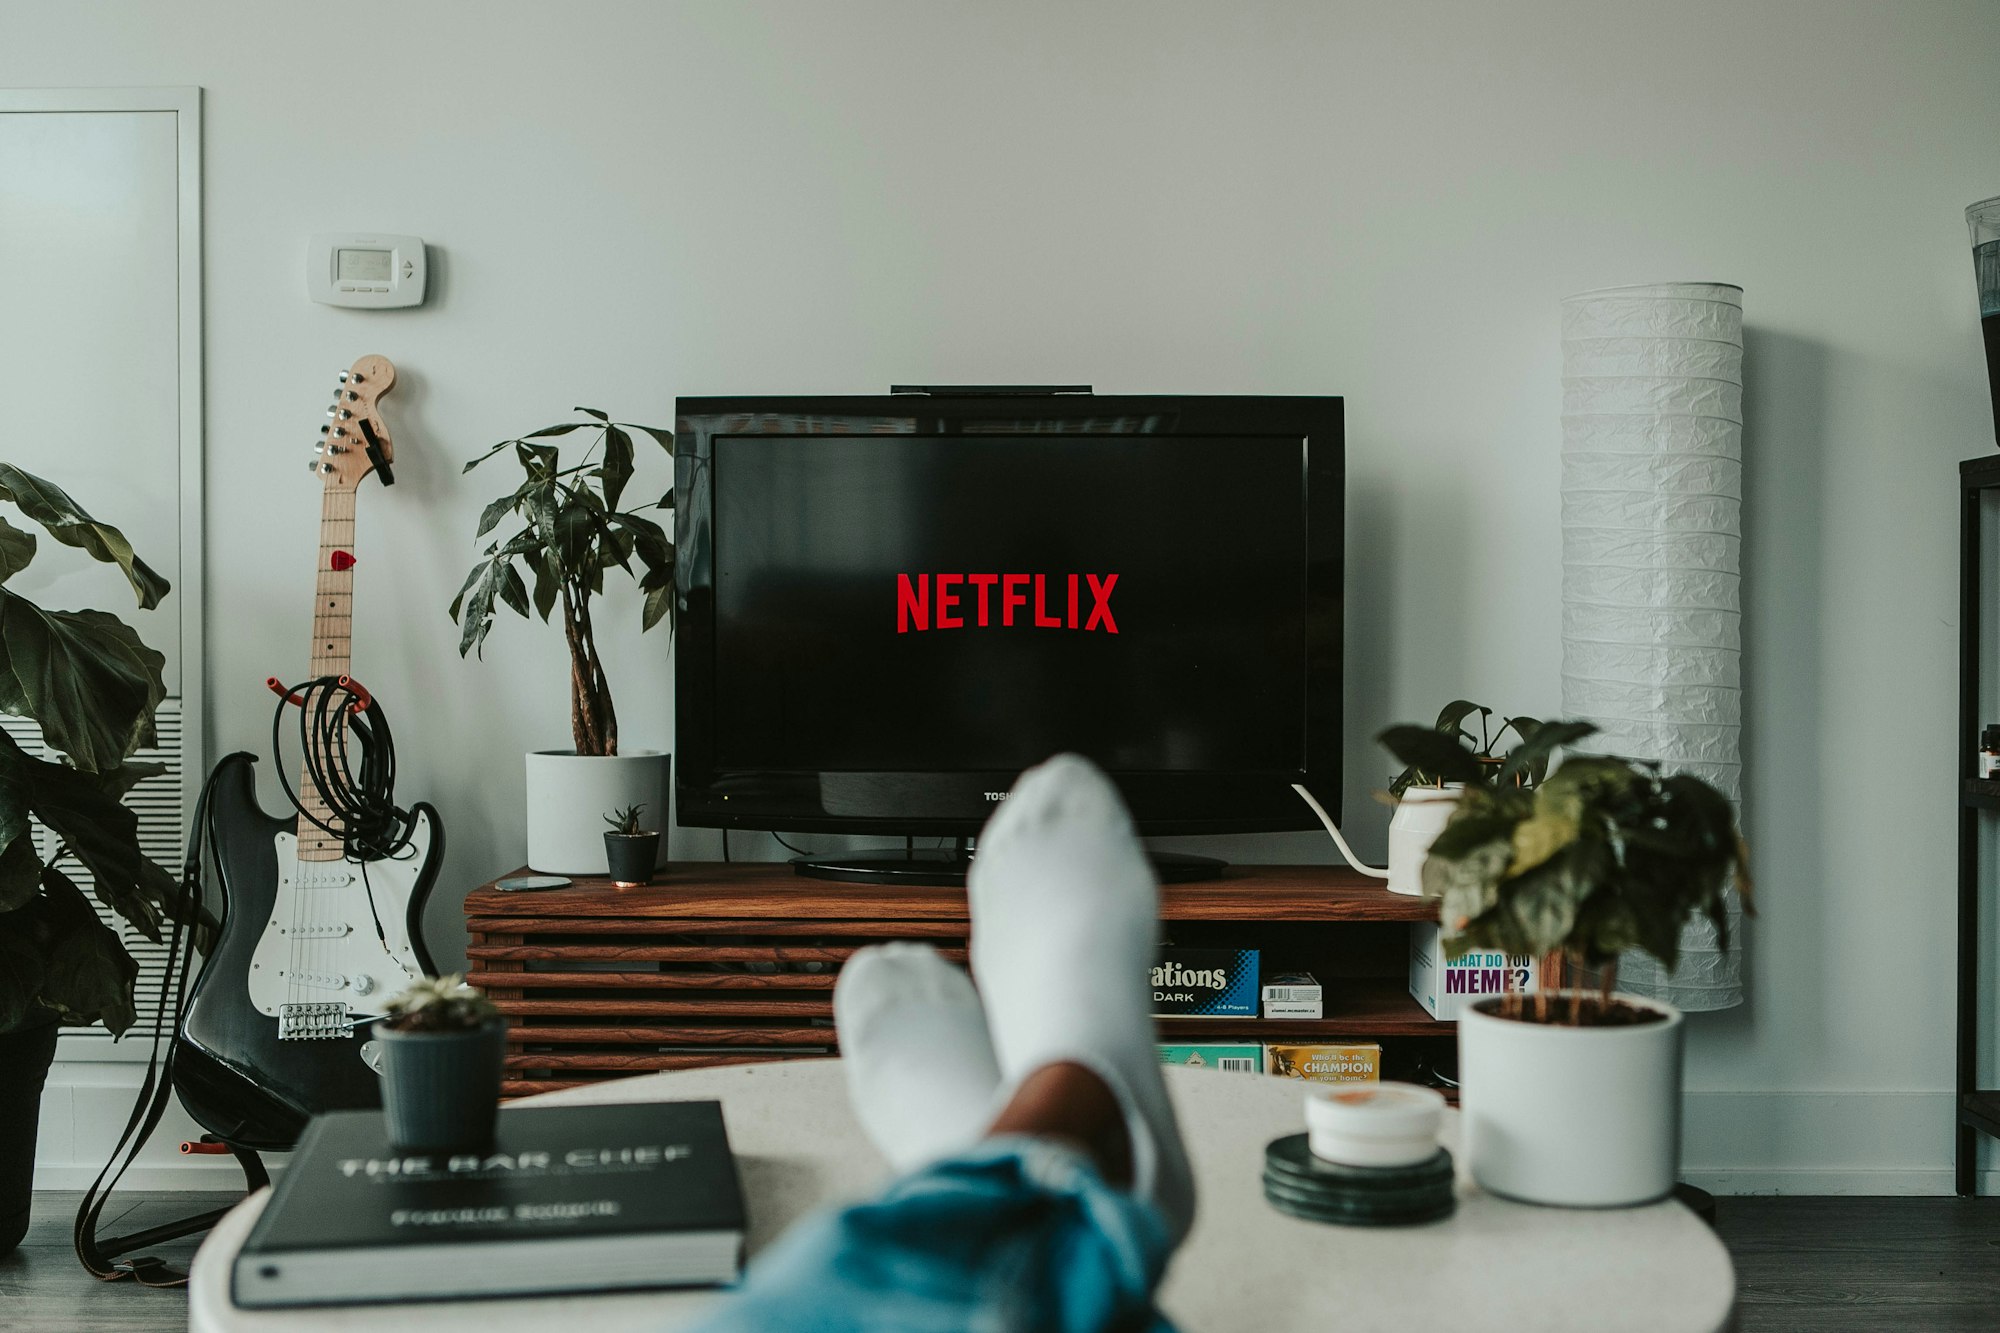 A person watches Netflix with their feet up on a coffee table